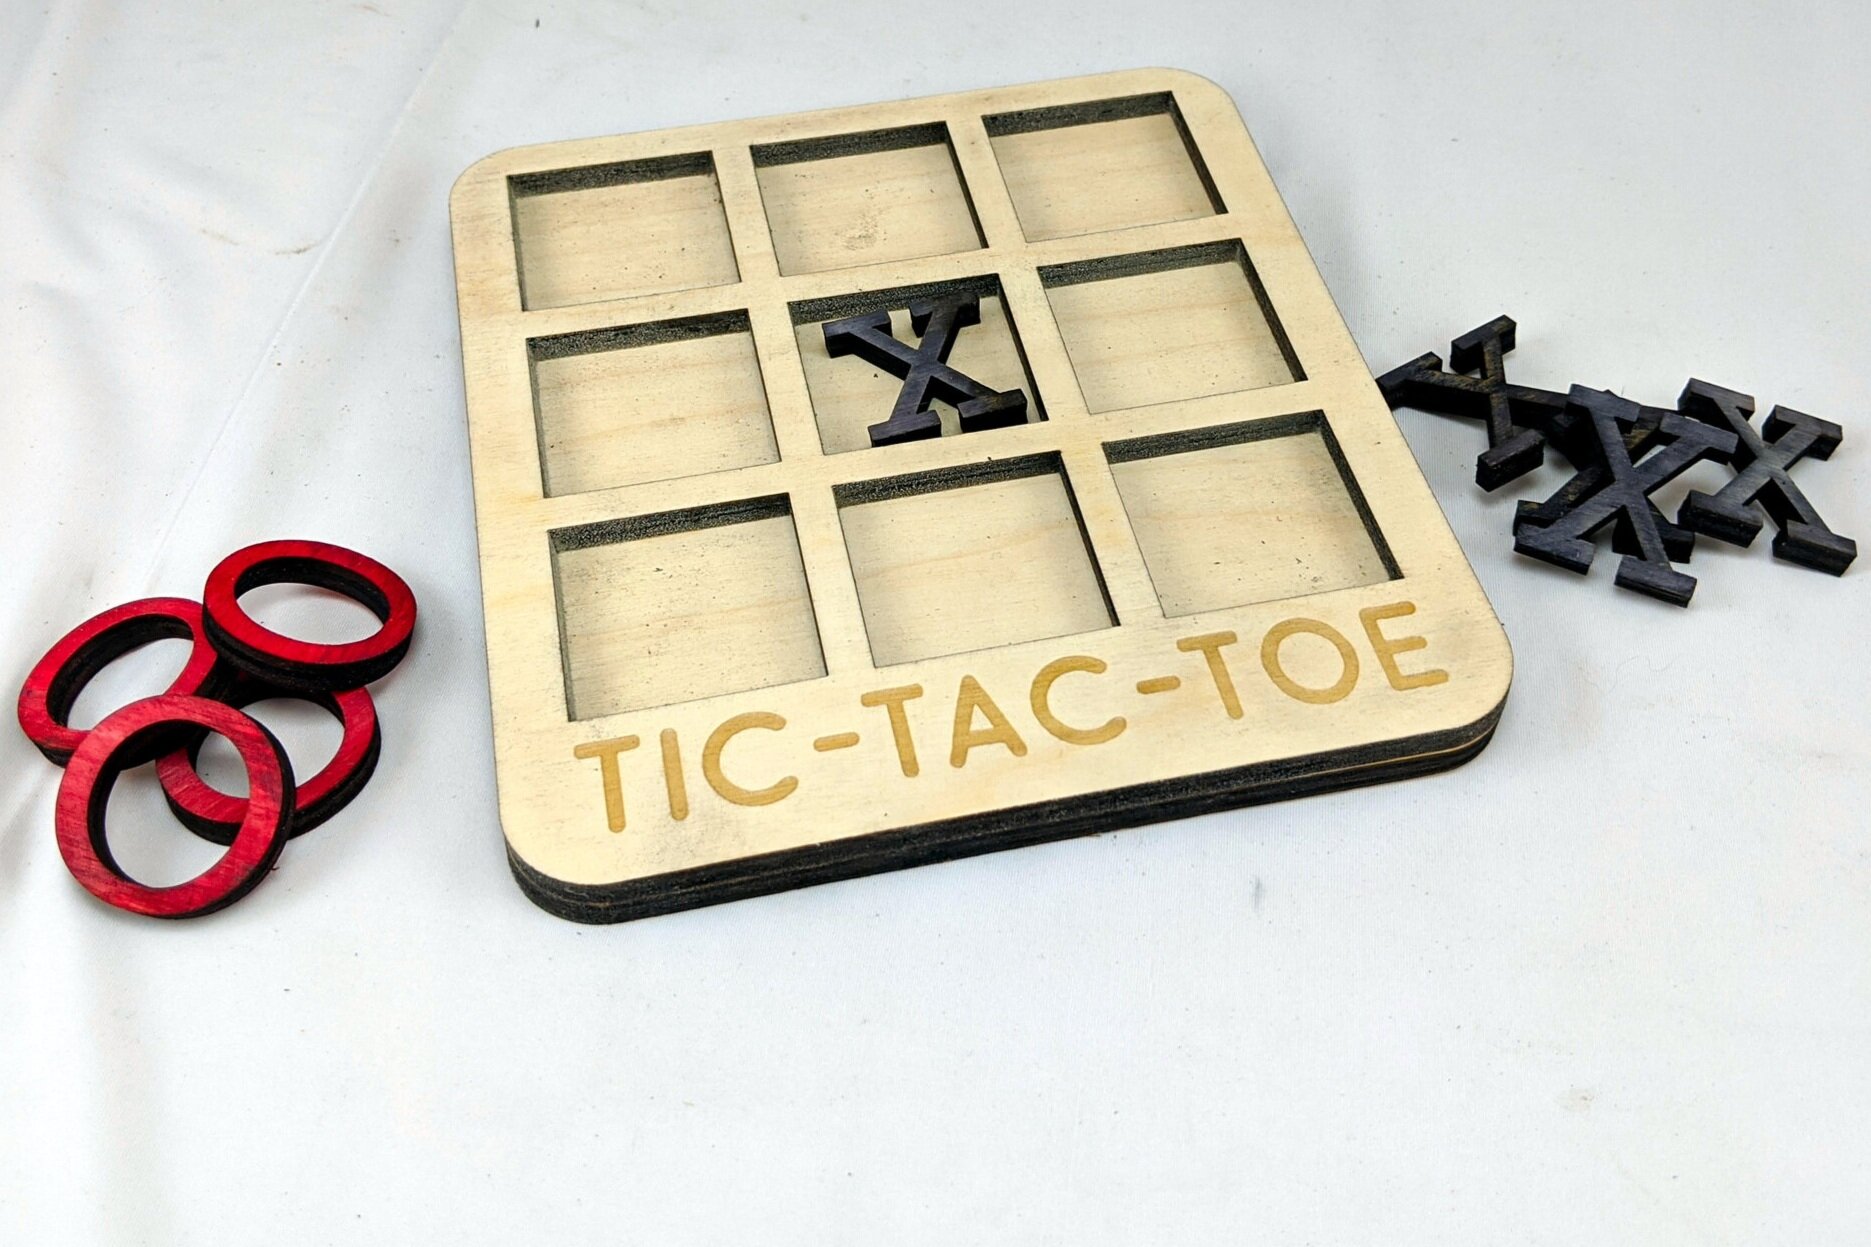 Tic-Heart-Toe Laser Cut Wooden game board | Customization Options —  Computer Aided Crafting